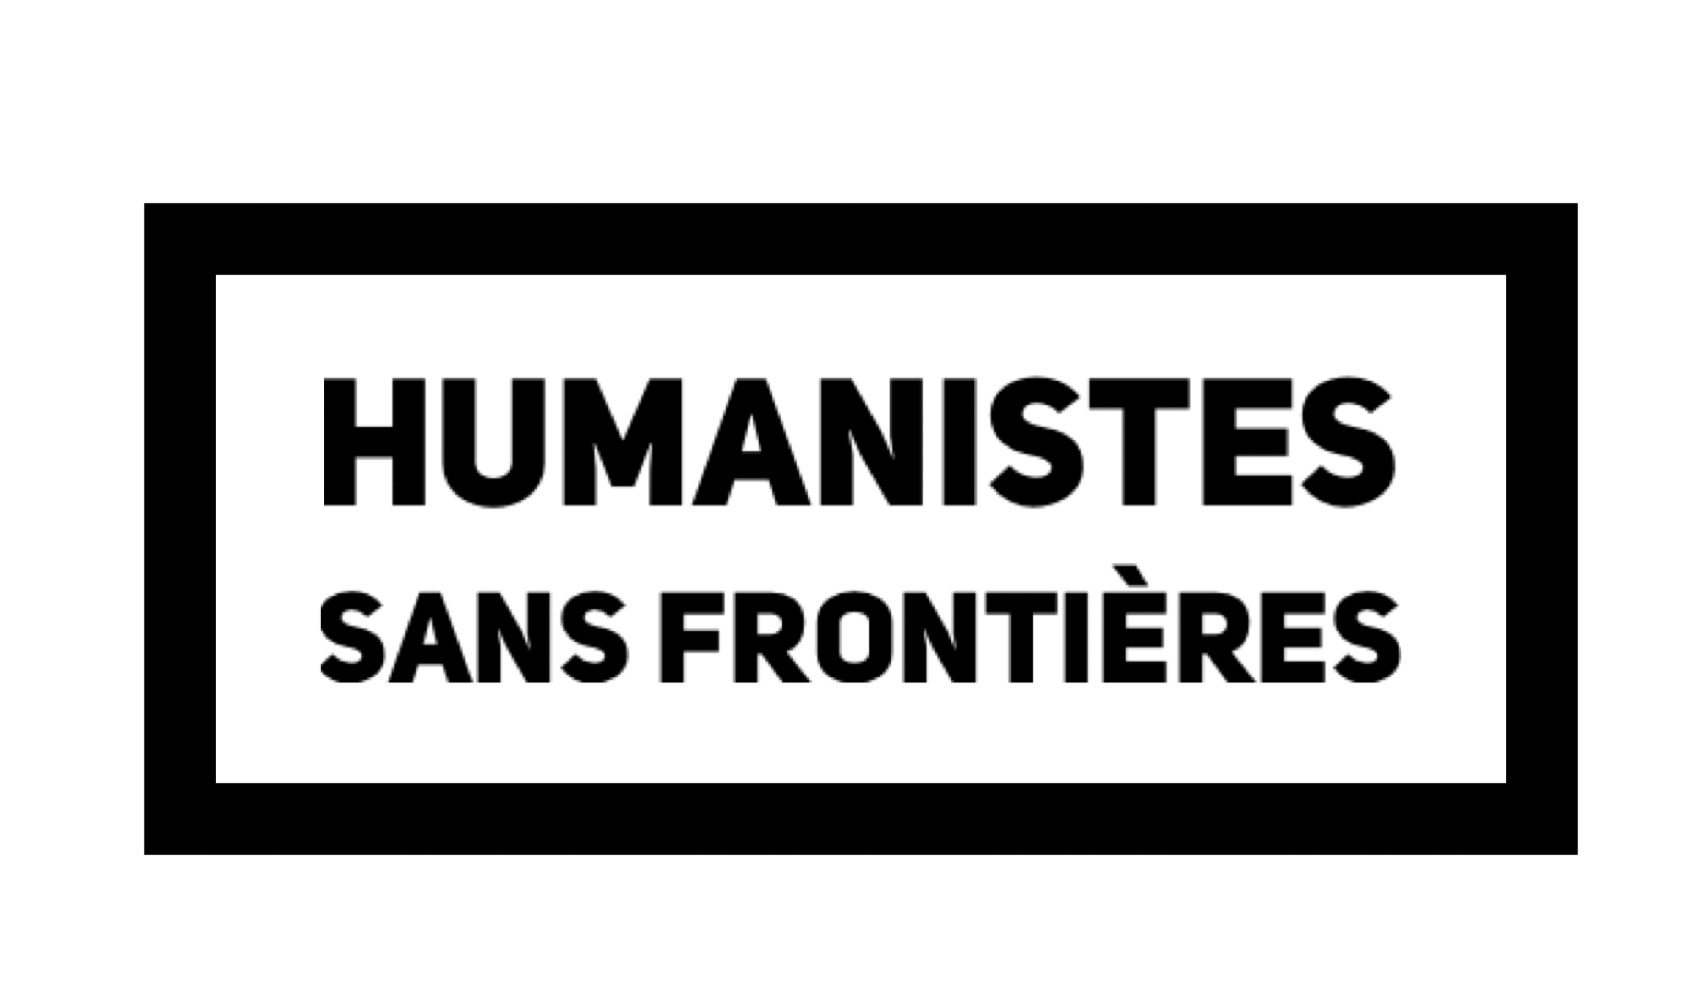 Humanistes sans frontires